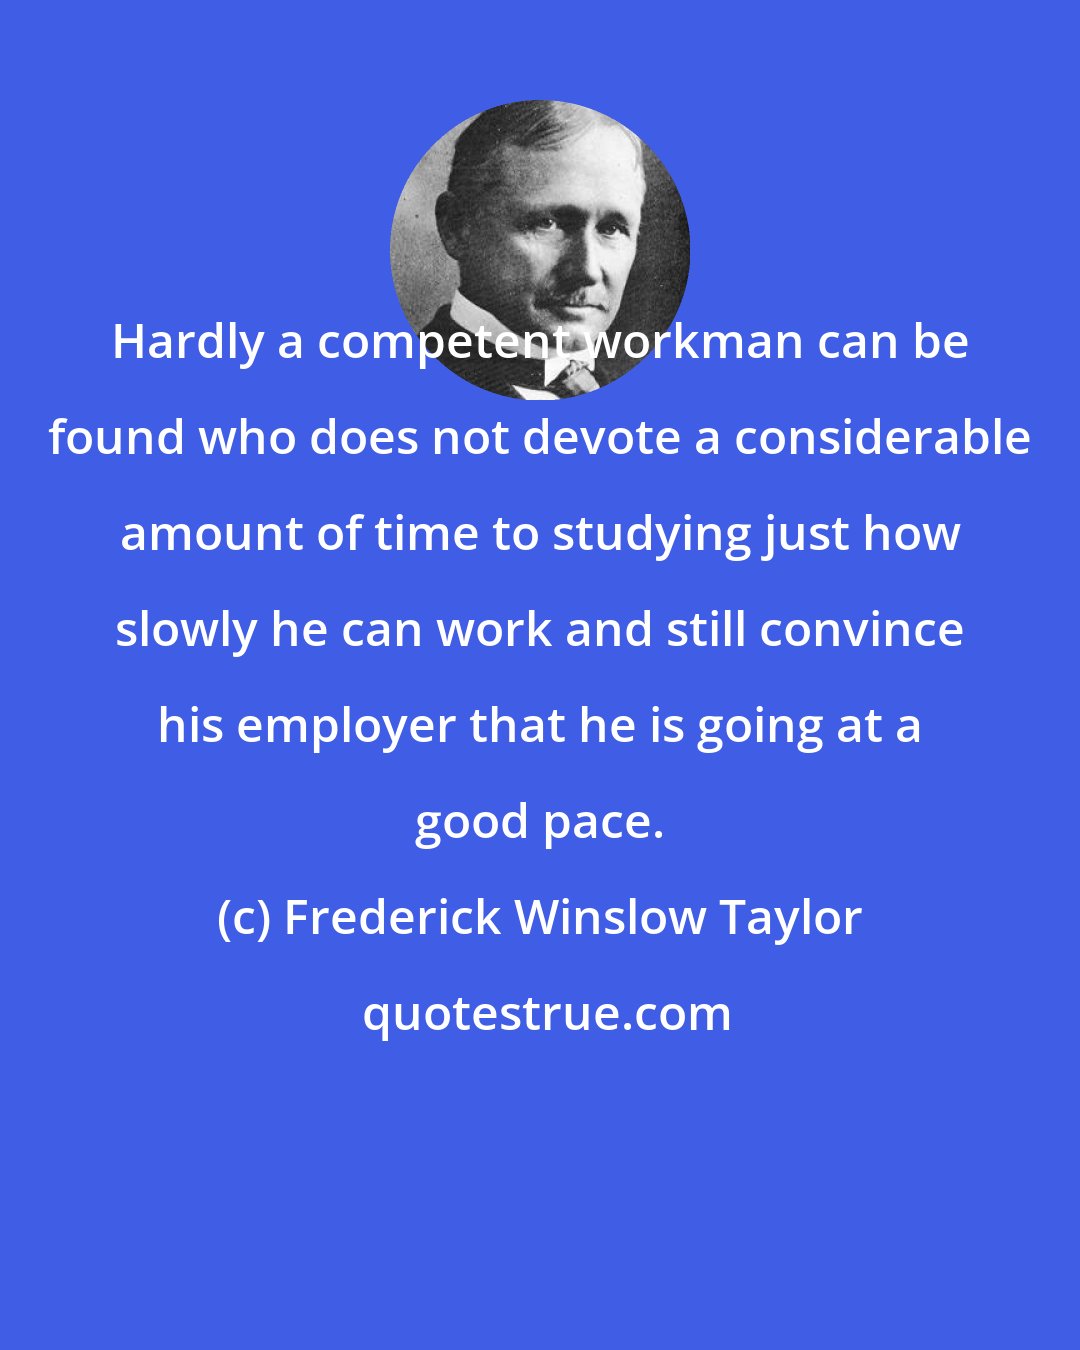 Frederick Winslow Taylor: Hardly a competent workman can be found who does not devote a considerable amount of time to studying just how slowly he can work and still convince his employer that he is going at a good pace.